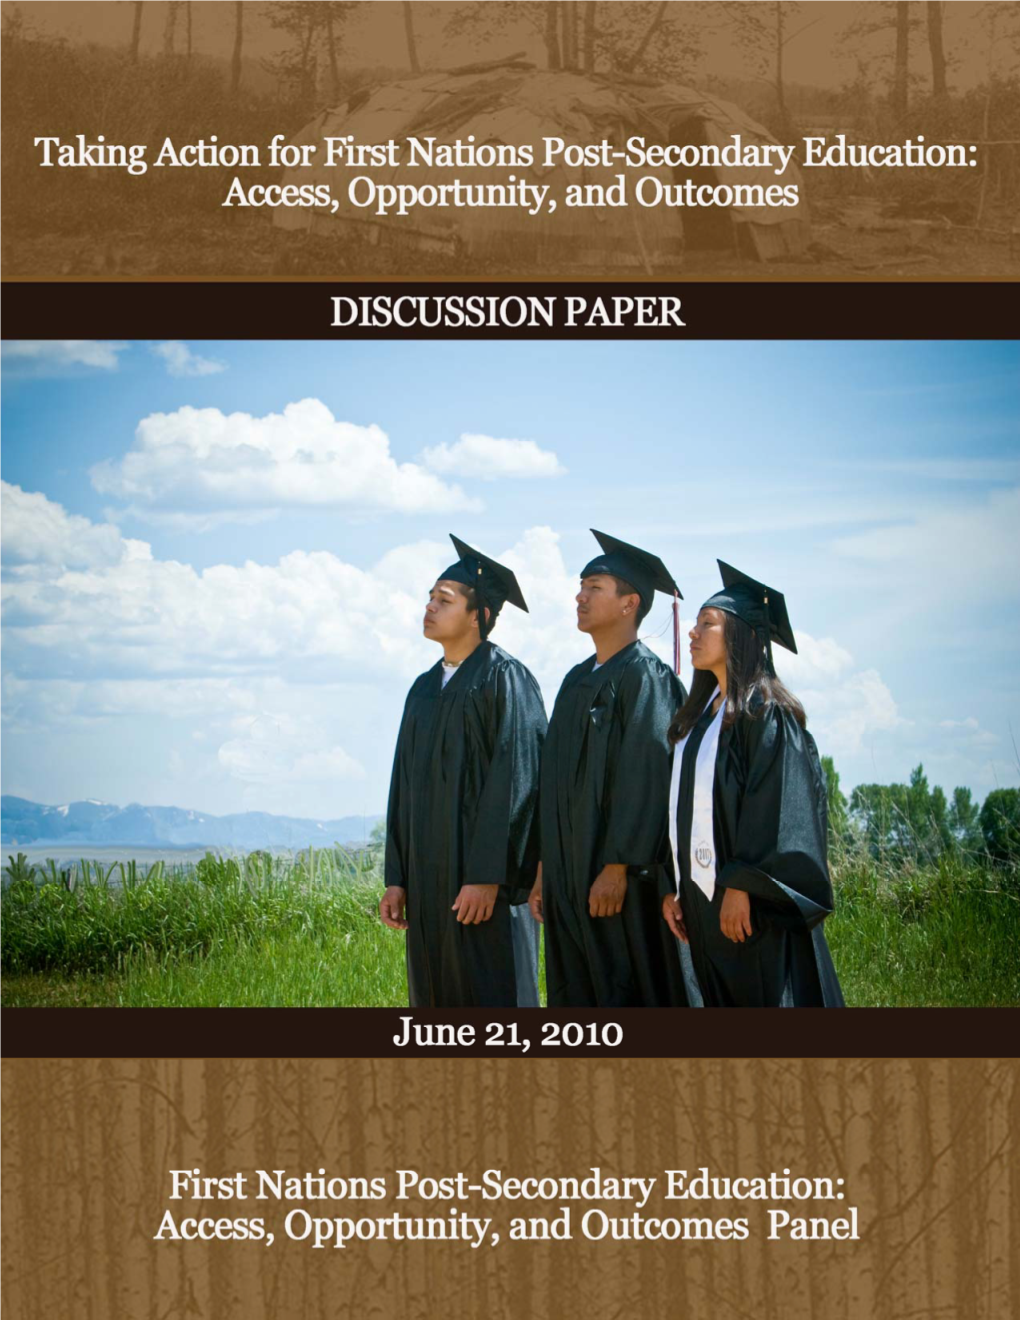 Taking Action for First Nations Post-Secondary Education: Access, Opportunity, and Outcomes Discussion Paper